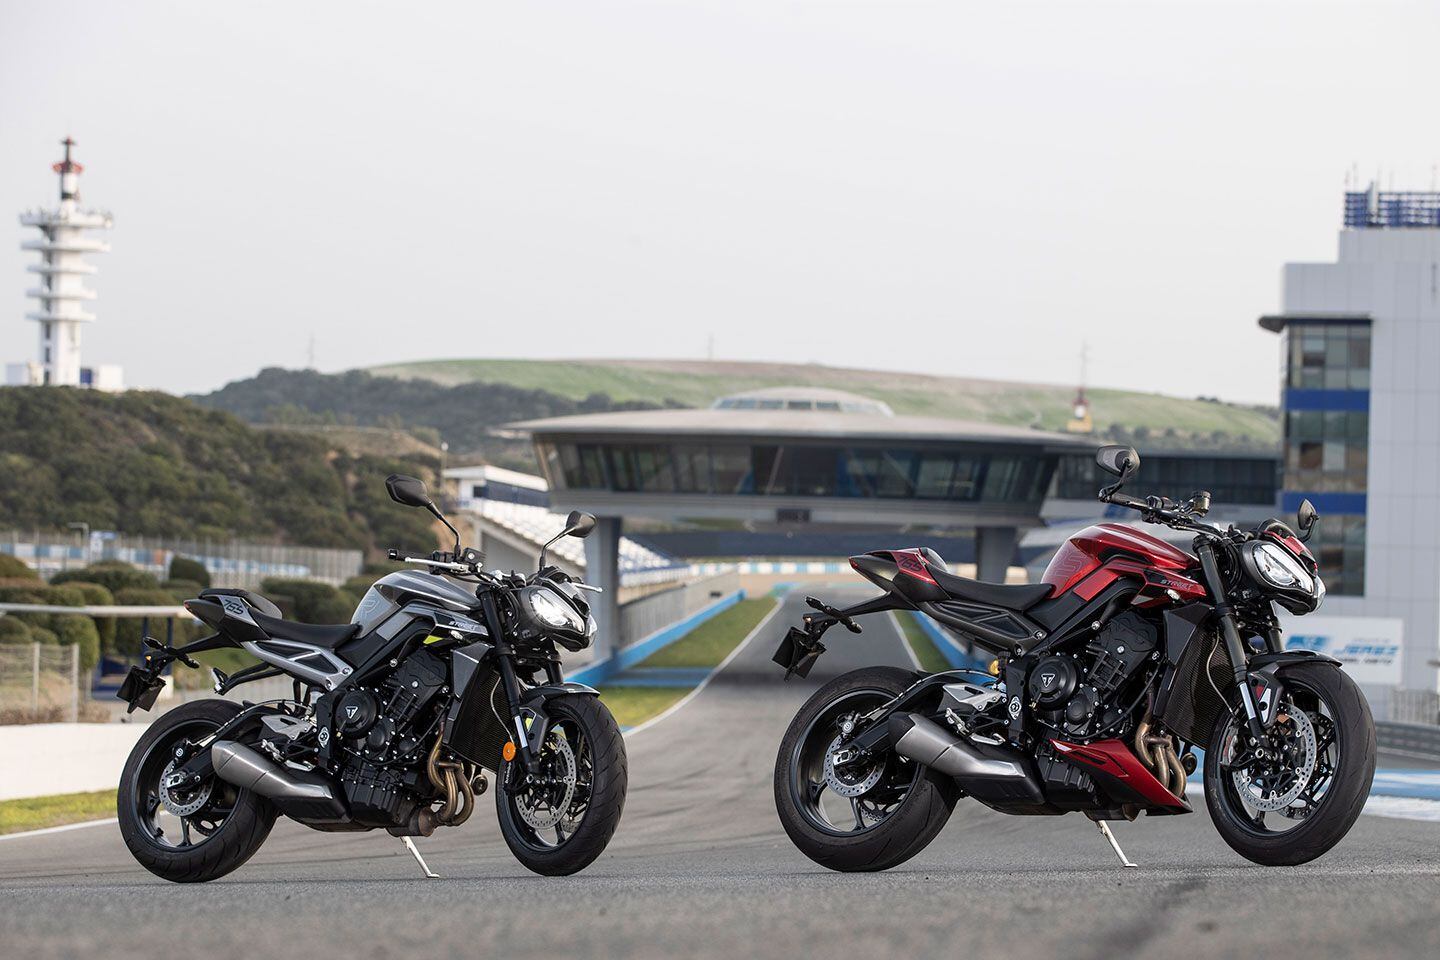 Street Triple 765 R (left) and Street Triple 765 RS (right). Notice the RS’ bar-end mirrors, bellypan, and seat cowl. RS model uses higher-spec suspension and brakes, while also benefiting from a higher engine tune.